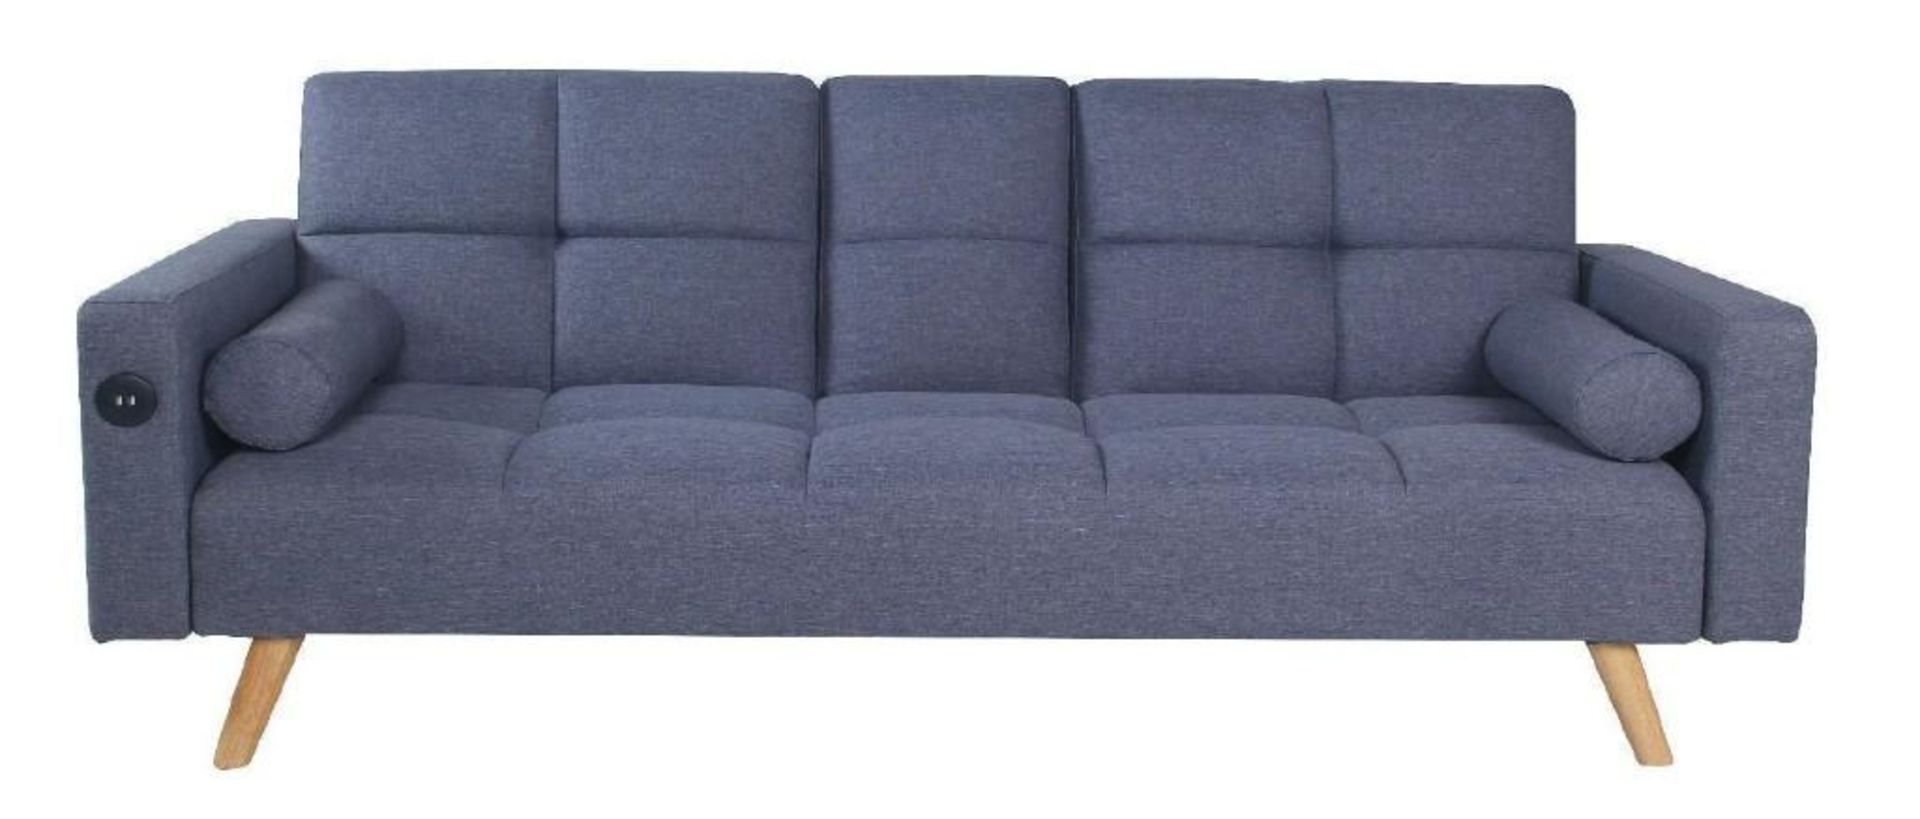 *NO VAT ON HAMMER* Brand new Boxed 2 Seater Clic Clac USB Sofa Bed - Image 3 of 10